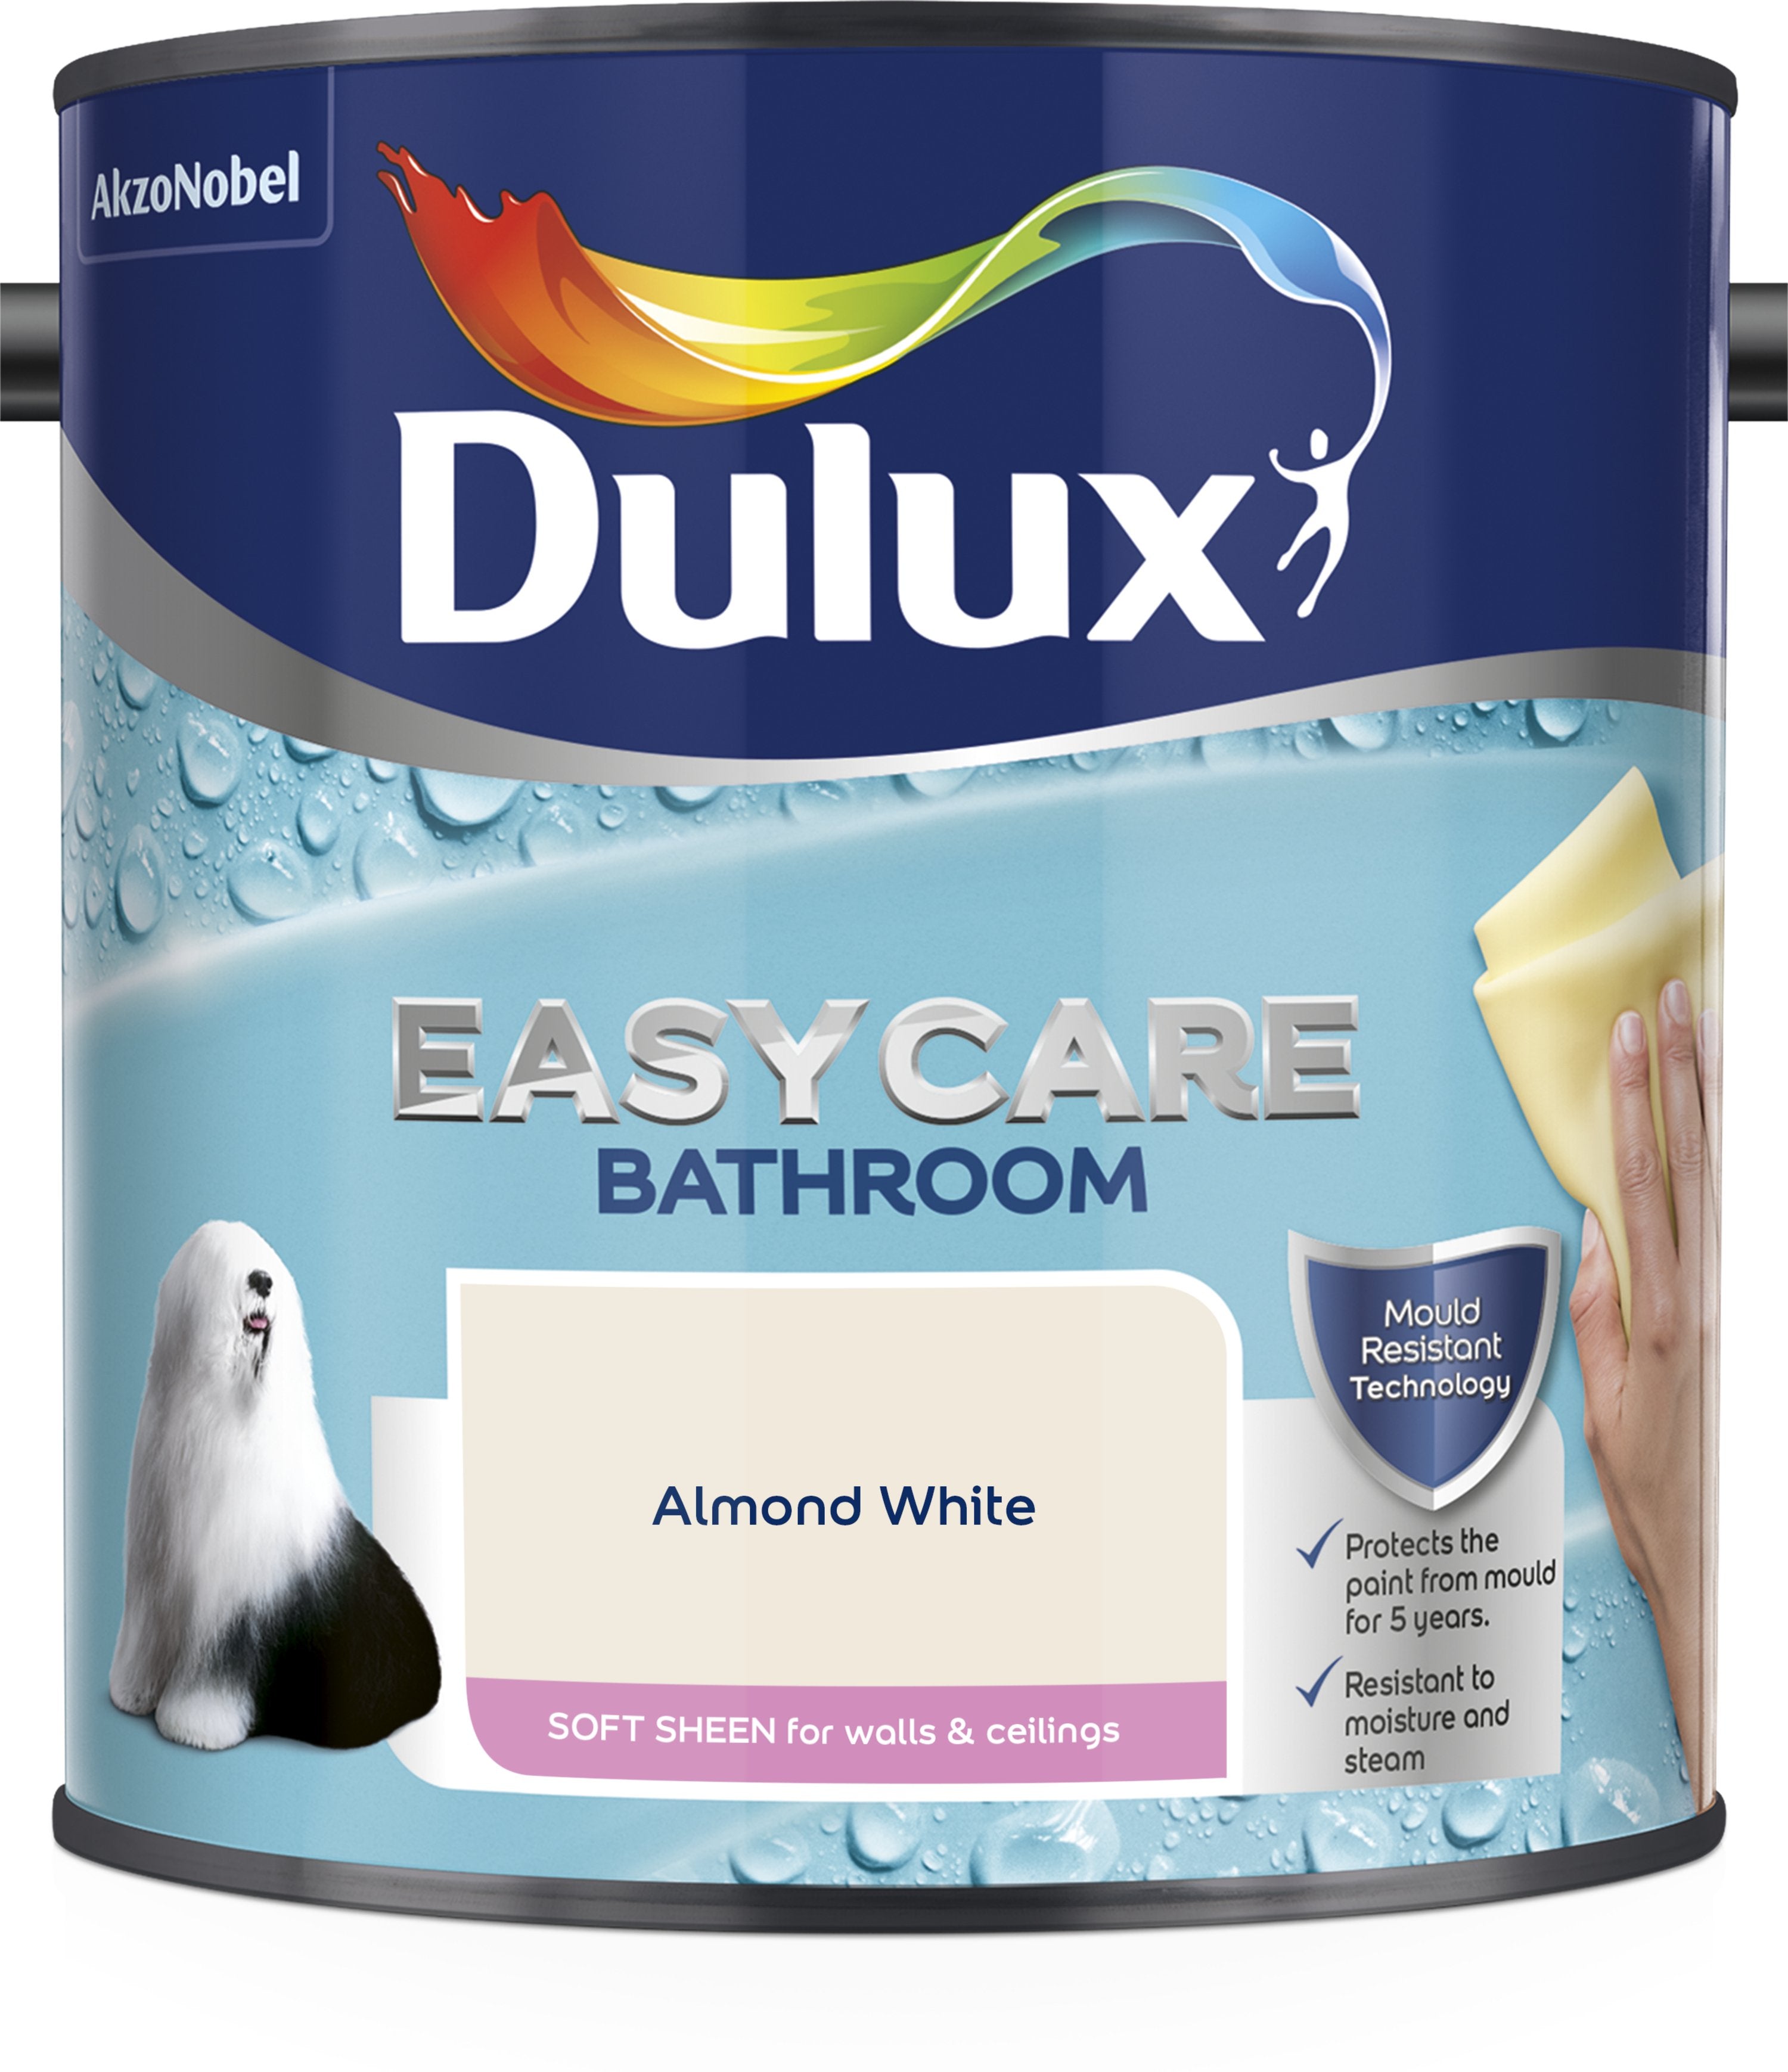 Dulux-Easycare-Bathroom-Soft-Sheen-Emulsion-Paint For-Walls-And-Ceilings-Almond-White-2.5L